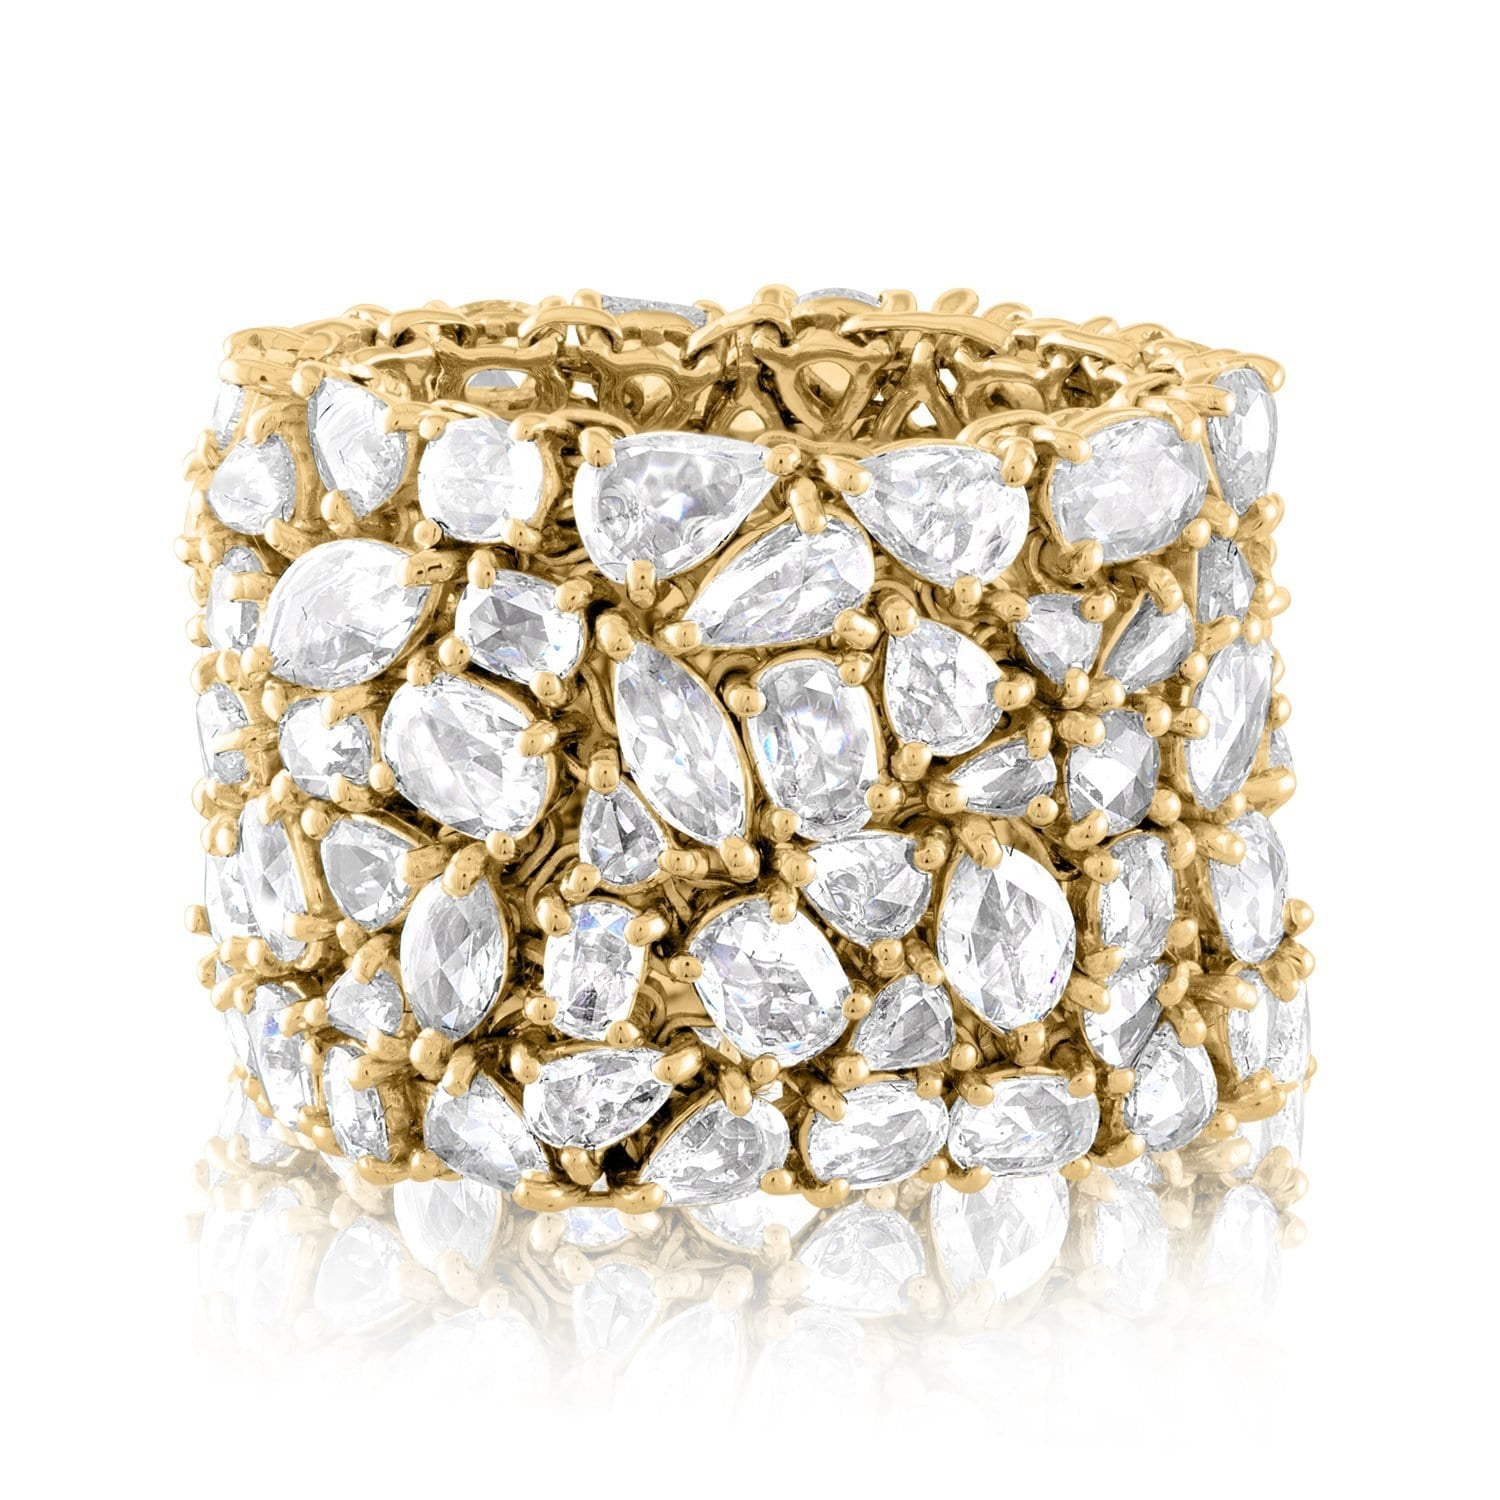 Vincents Fine Jewelry | Jane Kaye | Rosecut Bliss Band Ring